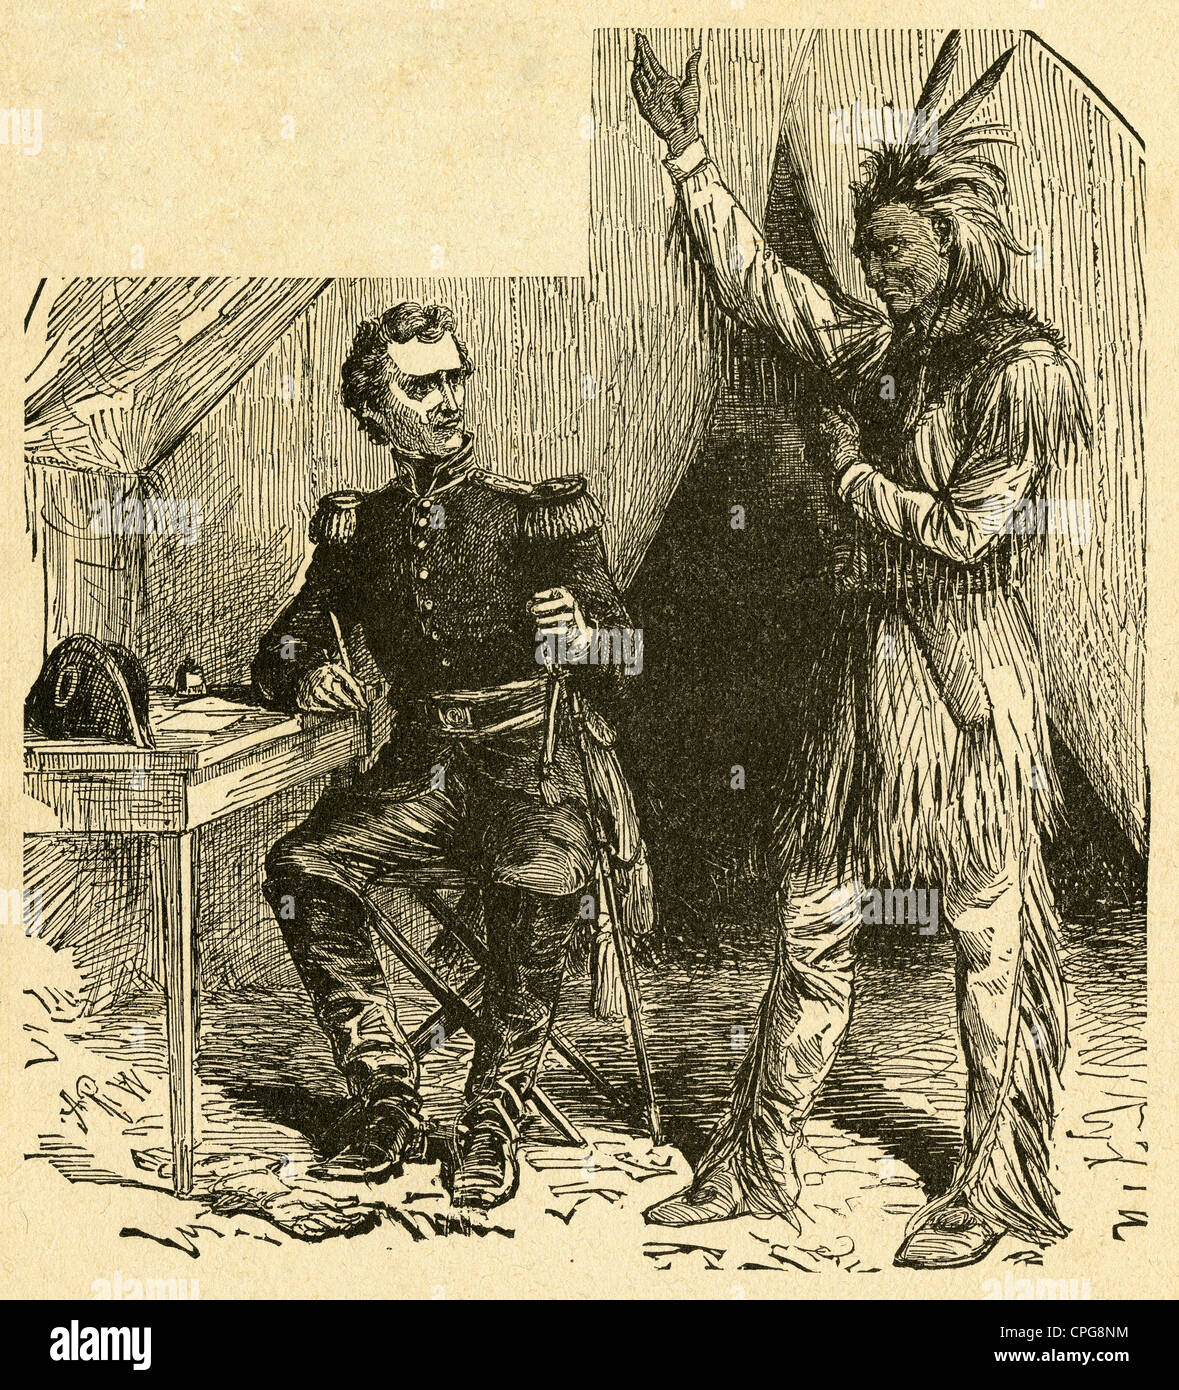 Circa 1900s engraving, the Indian chief Weatherford surrenders to General Jackson. Stock Photo